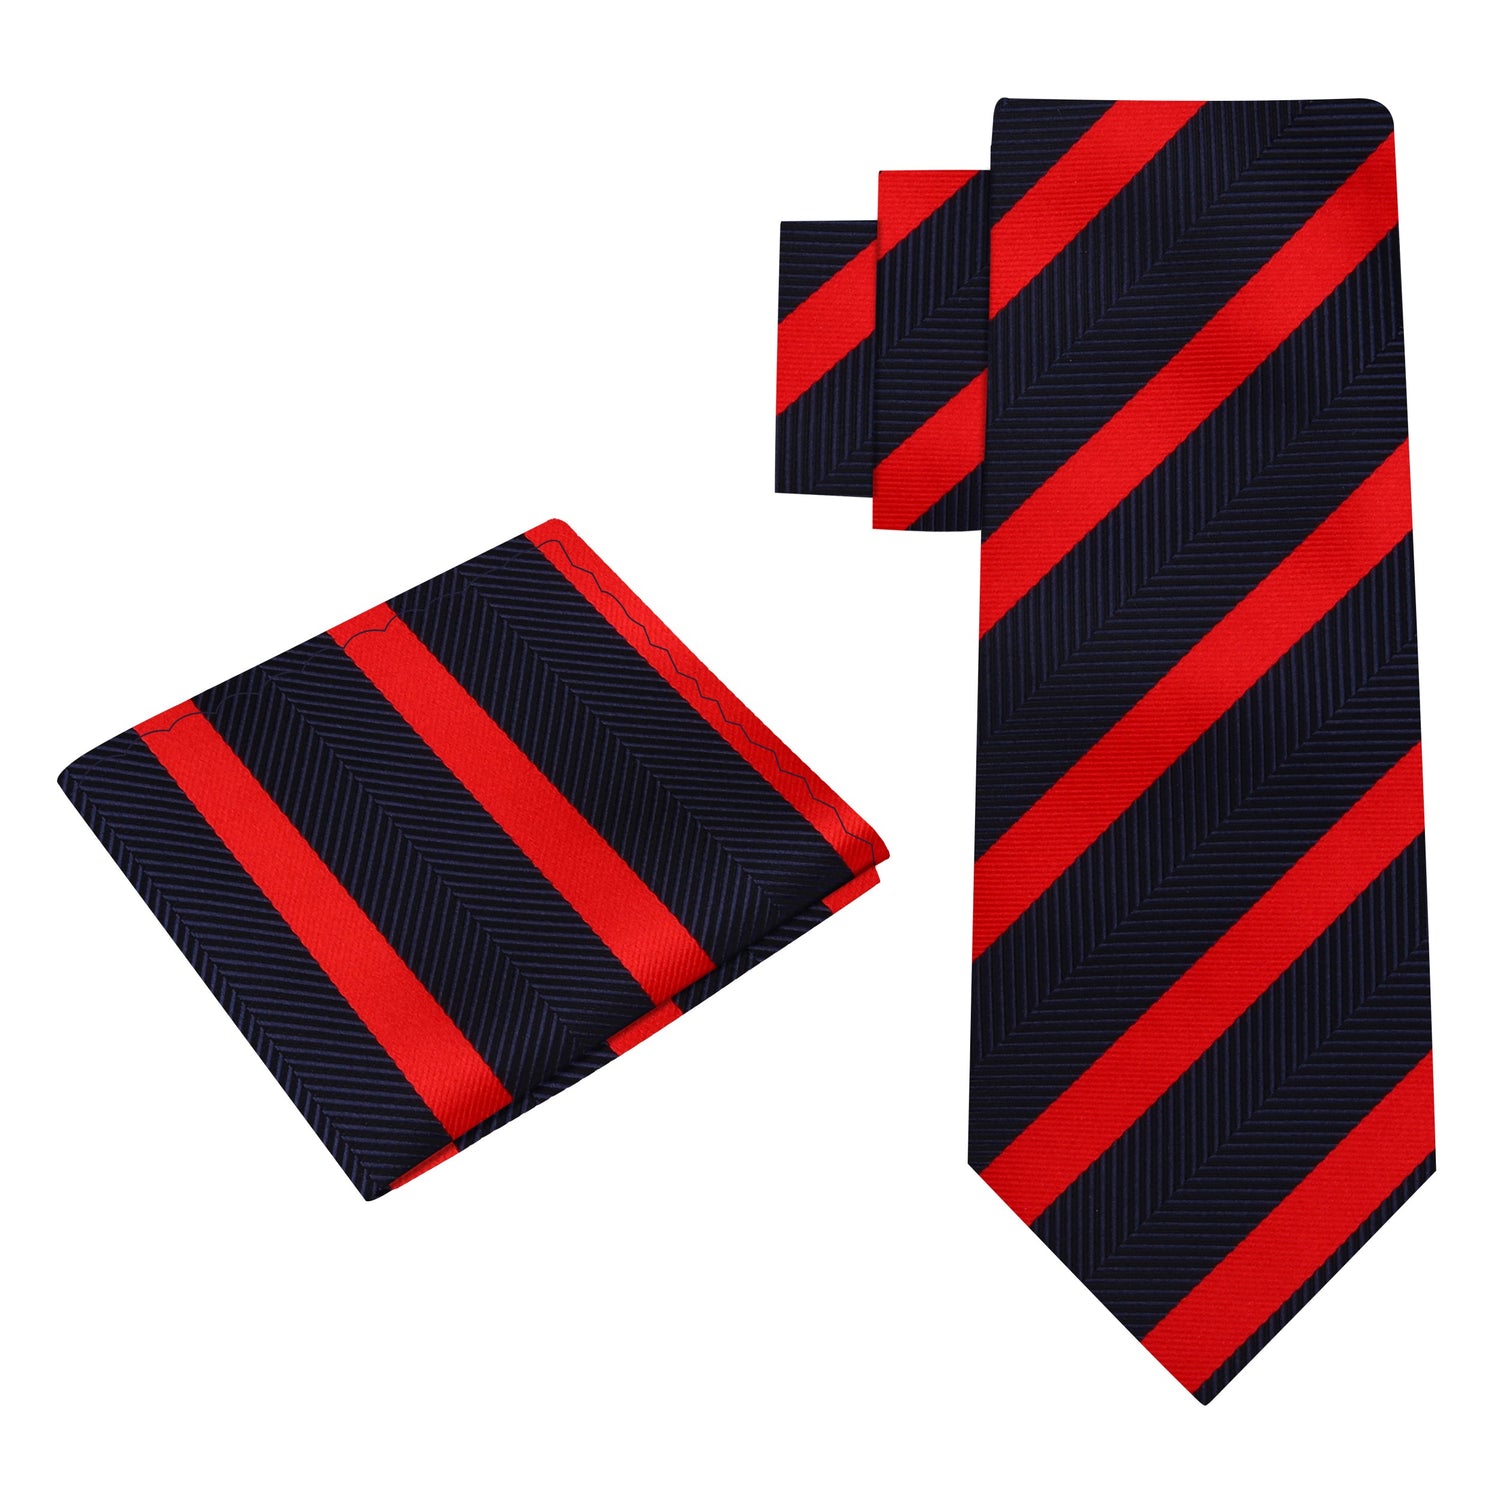 Alt view: blue red stripe tie and square